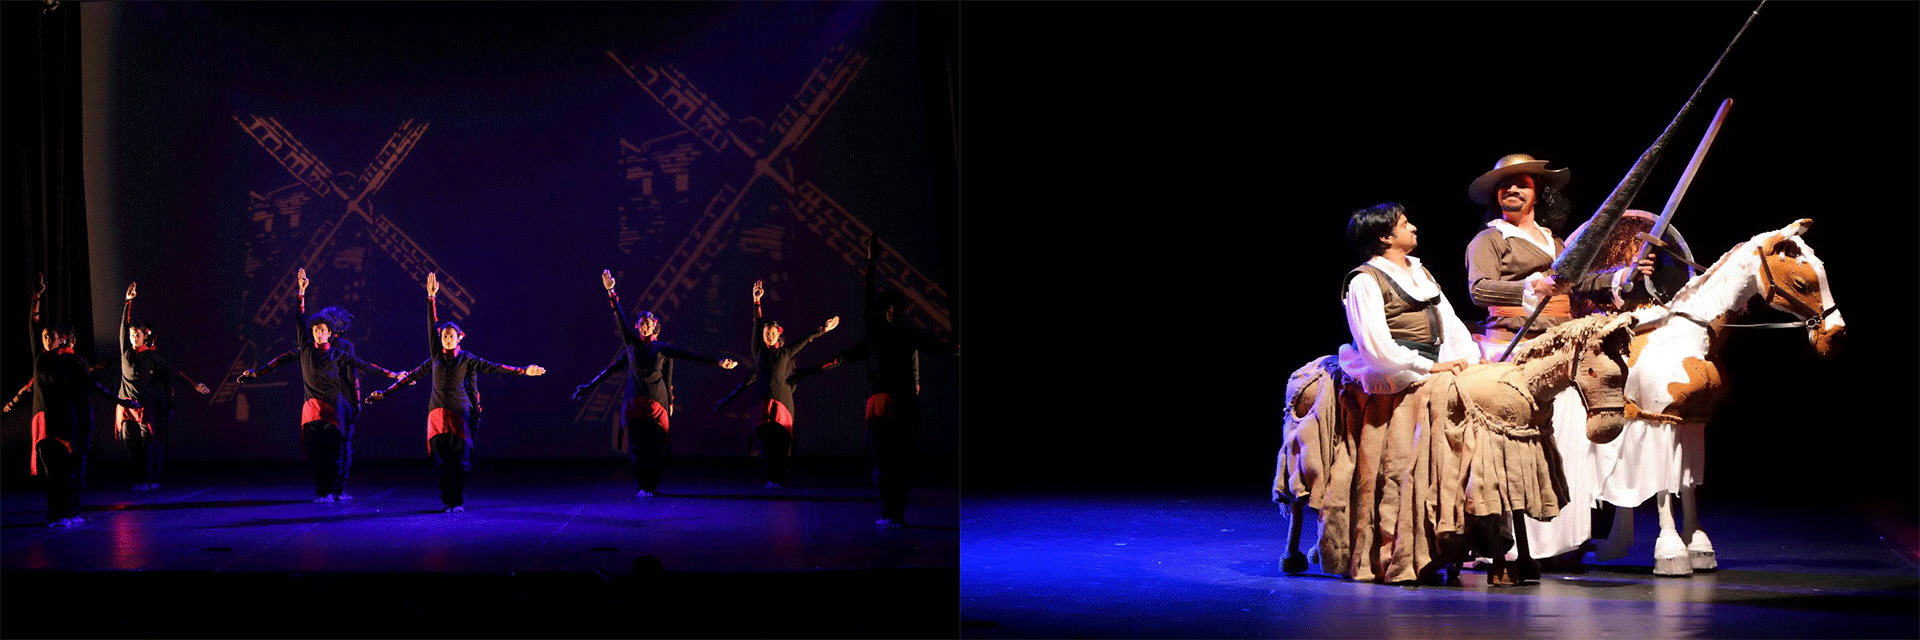 Lighting effects for Dance Theatre 